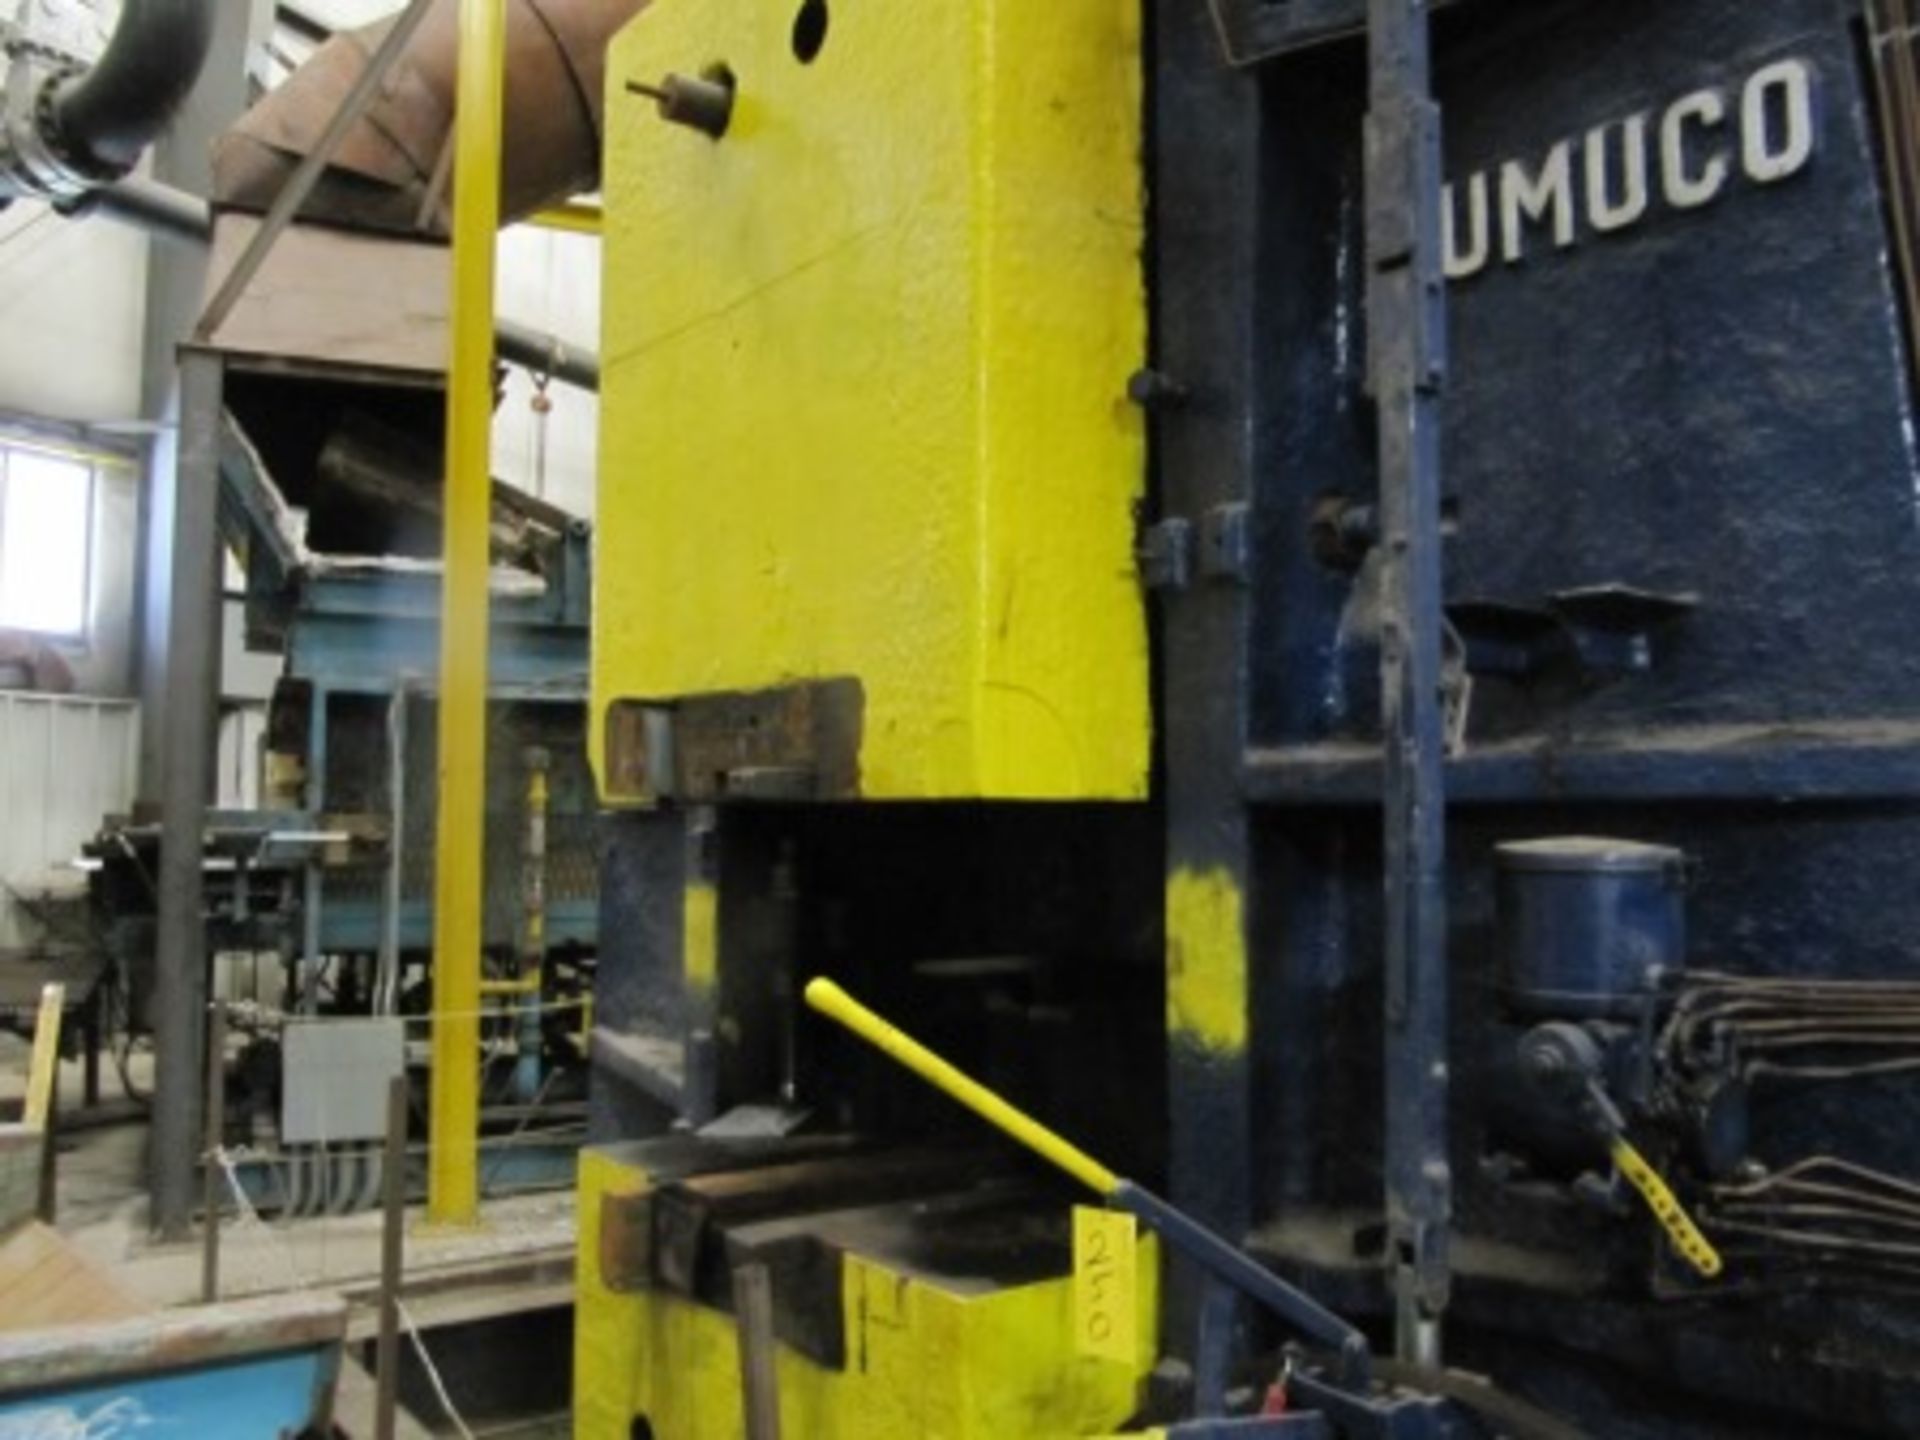 EUMUCO 2,200-TON COUNTER BLOW FORGING HAMMER, 98"X46" APPROX. 45,000# W/RAM, PLATES, ETC. (BLDG. 2) - Image 4 of 9